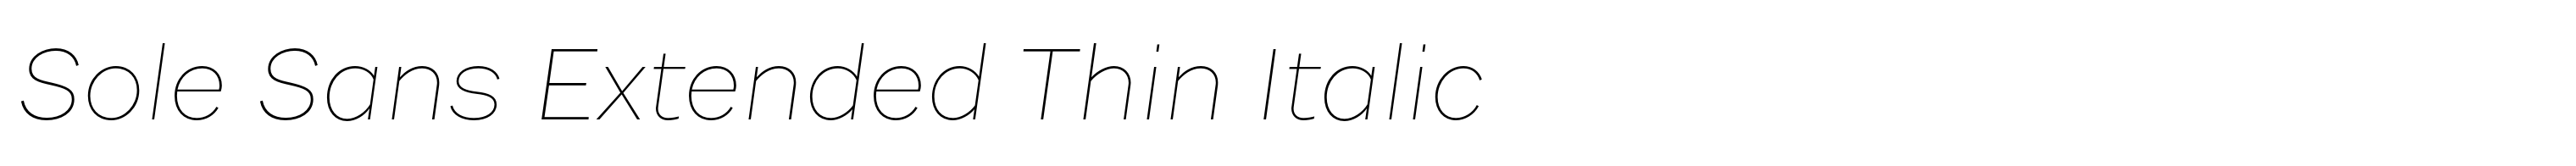 Sole Sans Extended Thin Italic